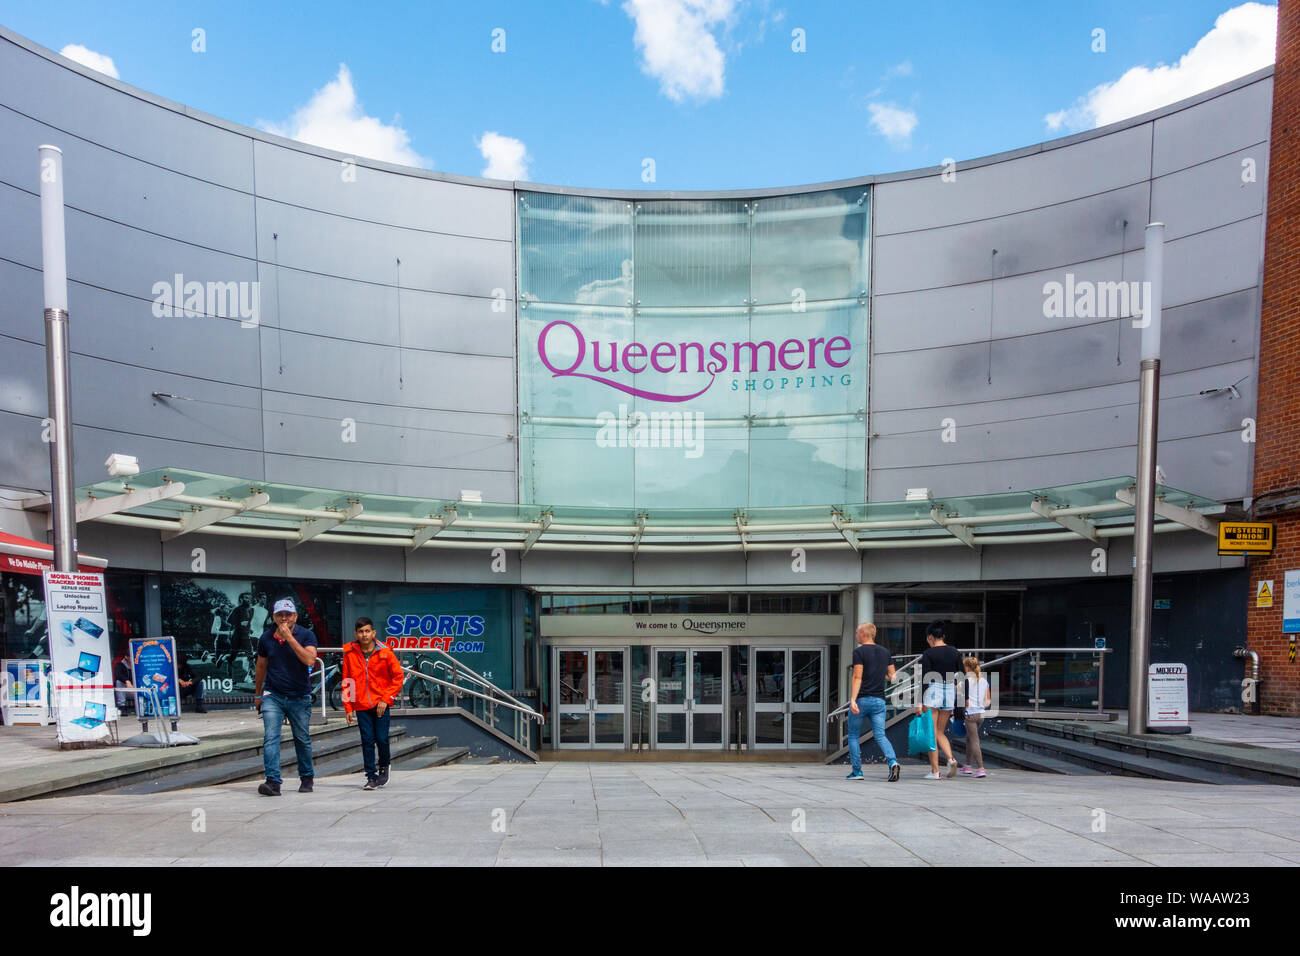 The Queensmere Shopping Centre on the High Street in Slough, Berkshire, UK Stock Photo